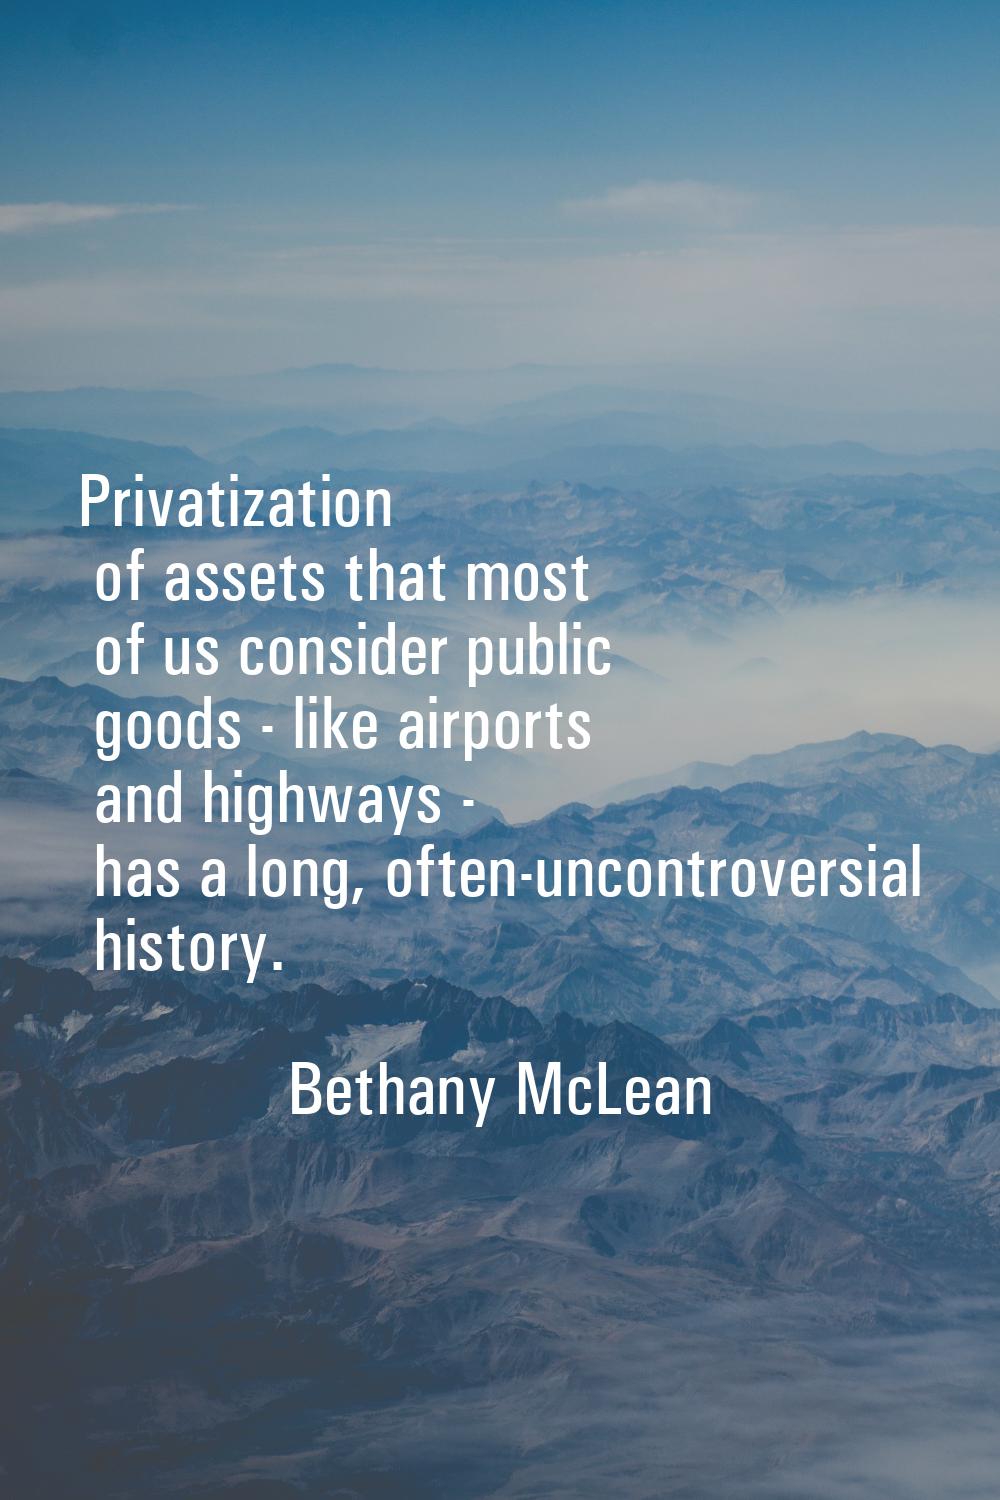 Privatization of assets that most of us consider public goods - like airports and highways - has a 